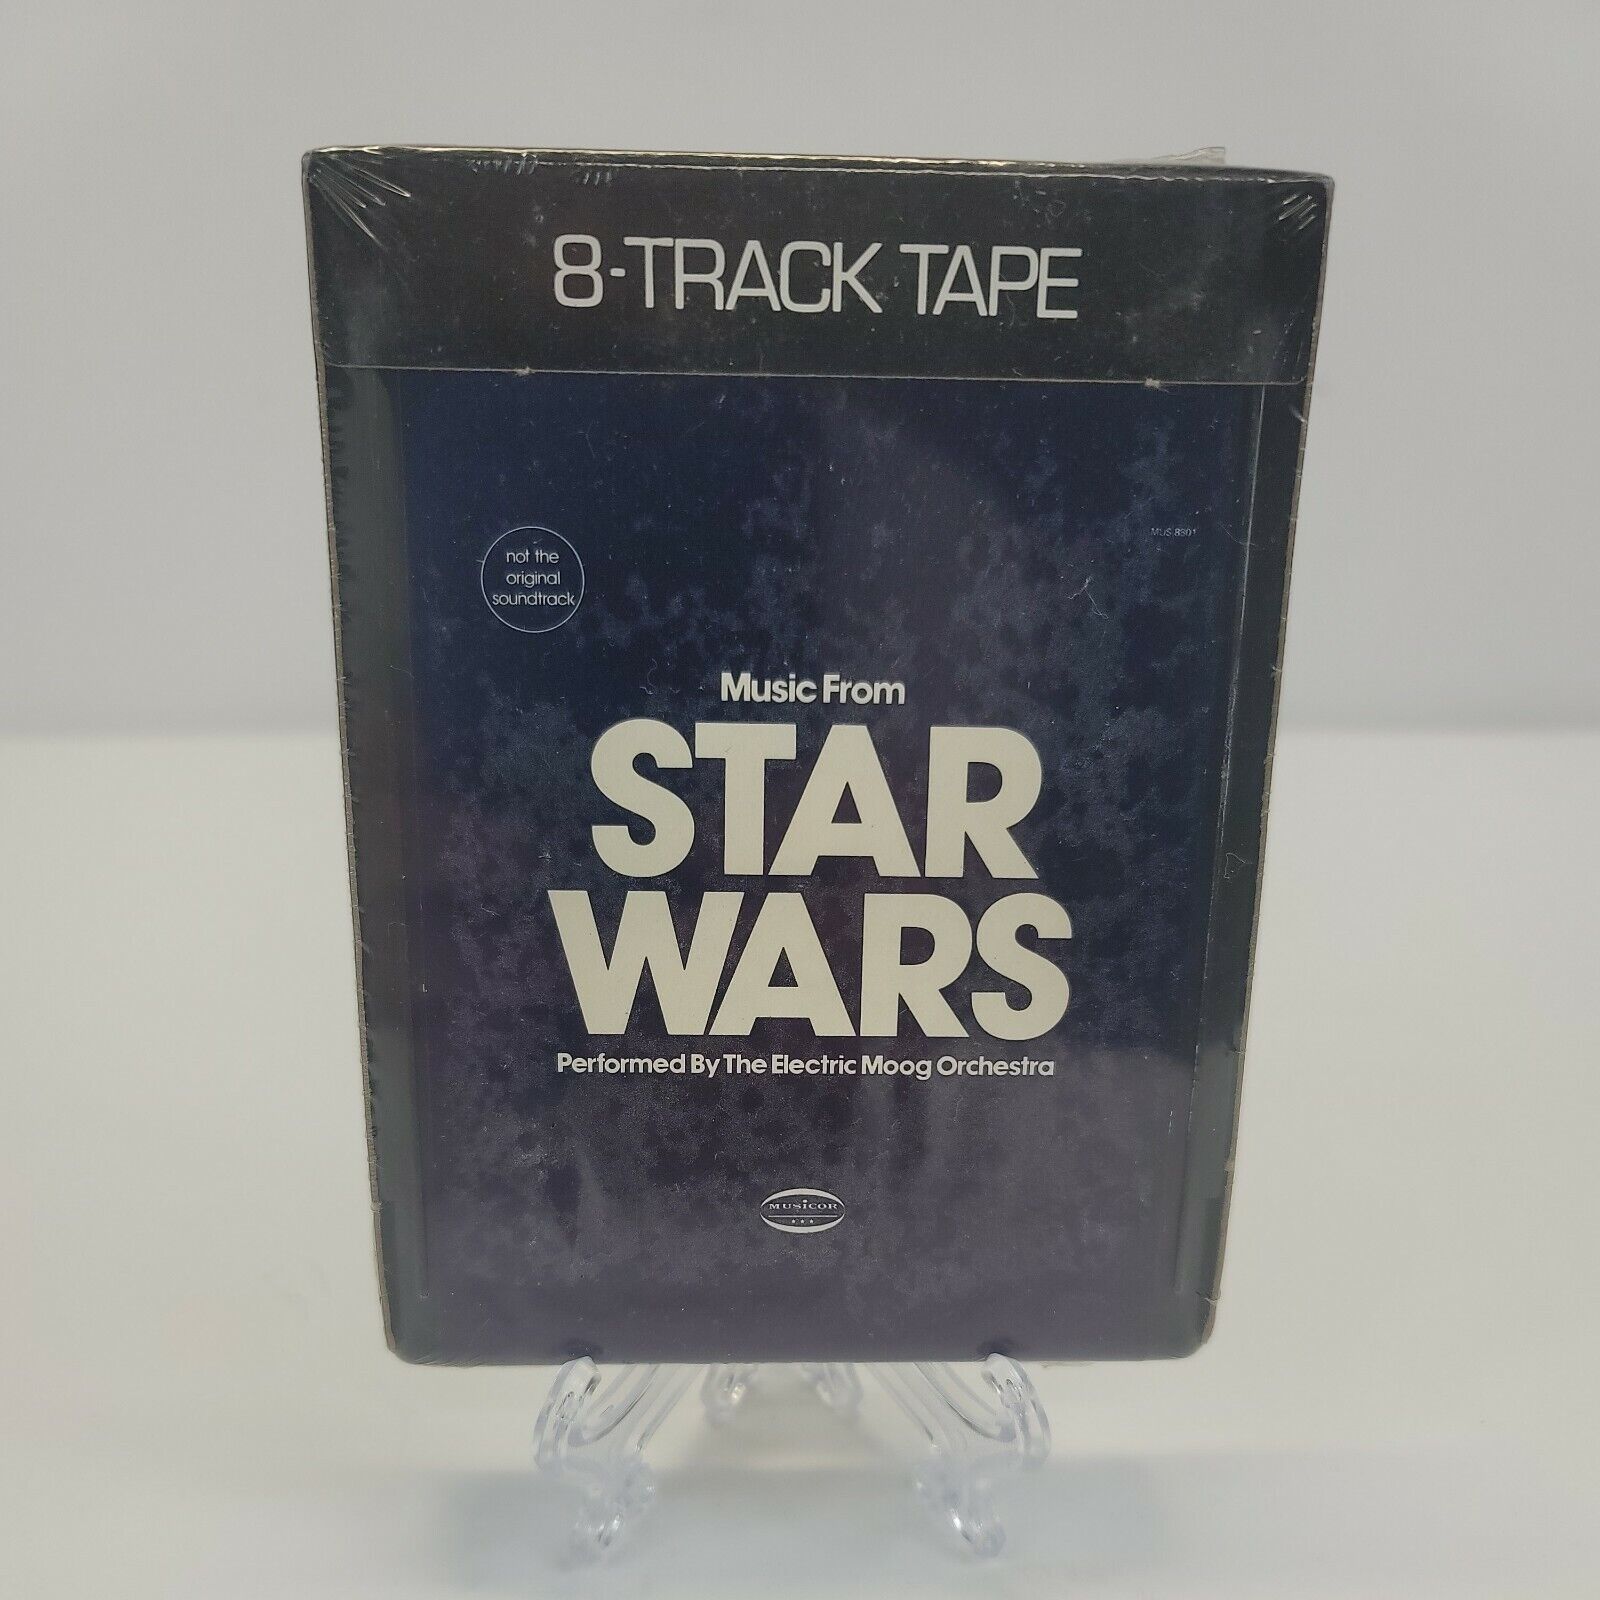 Star Wars 8 Track Tape by The Electric Moog Orchestra Factory Sealed 1977